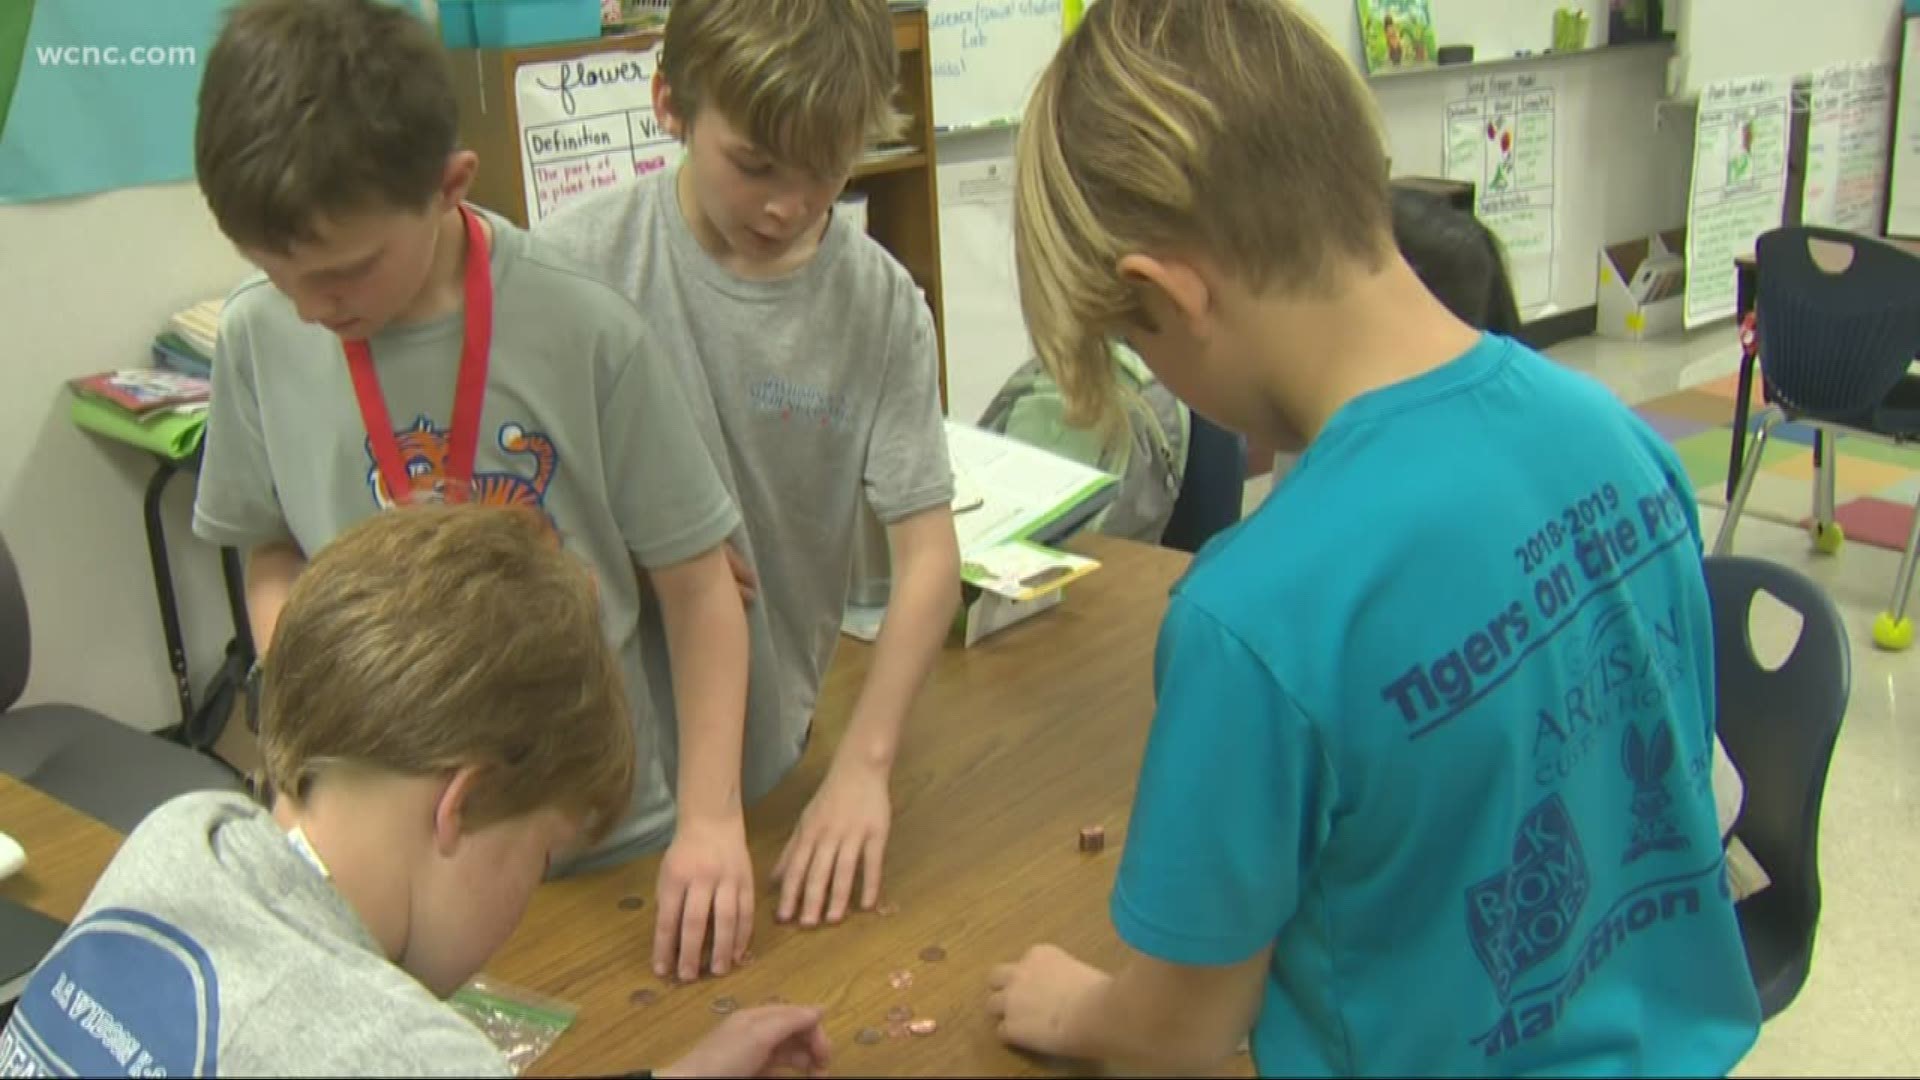 The children participating are turning their loose change into donations toward lymphoma and leukemia research.